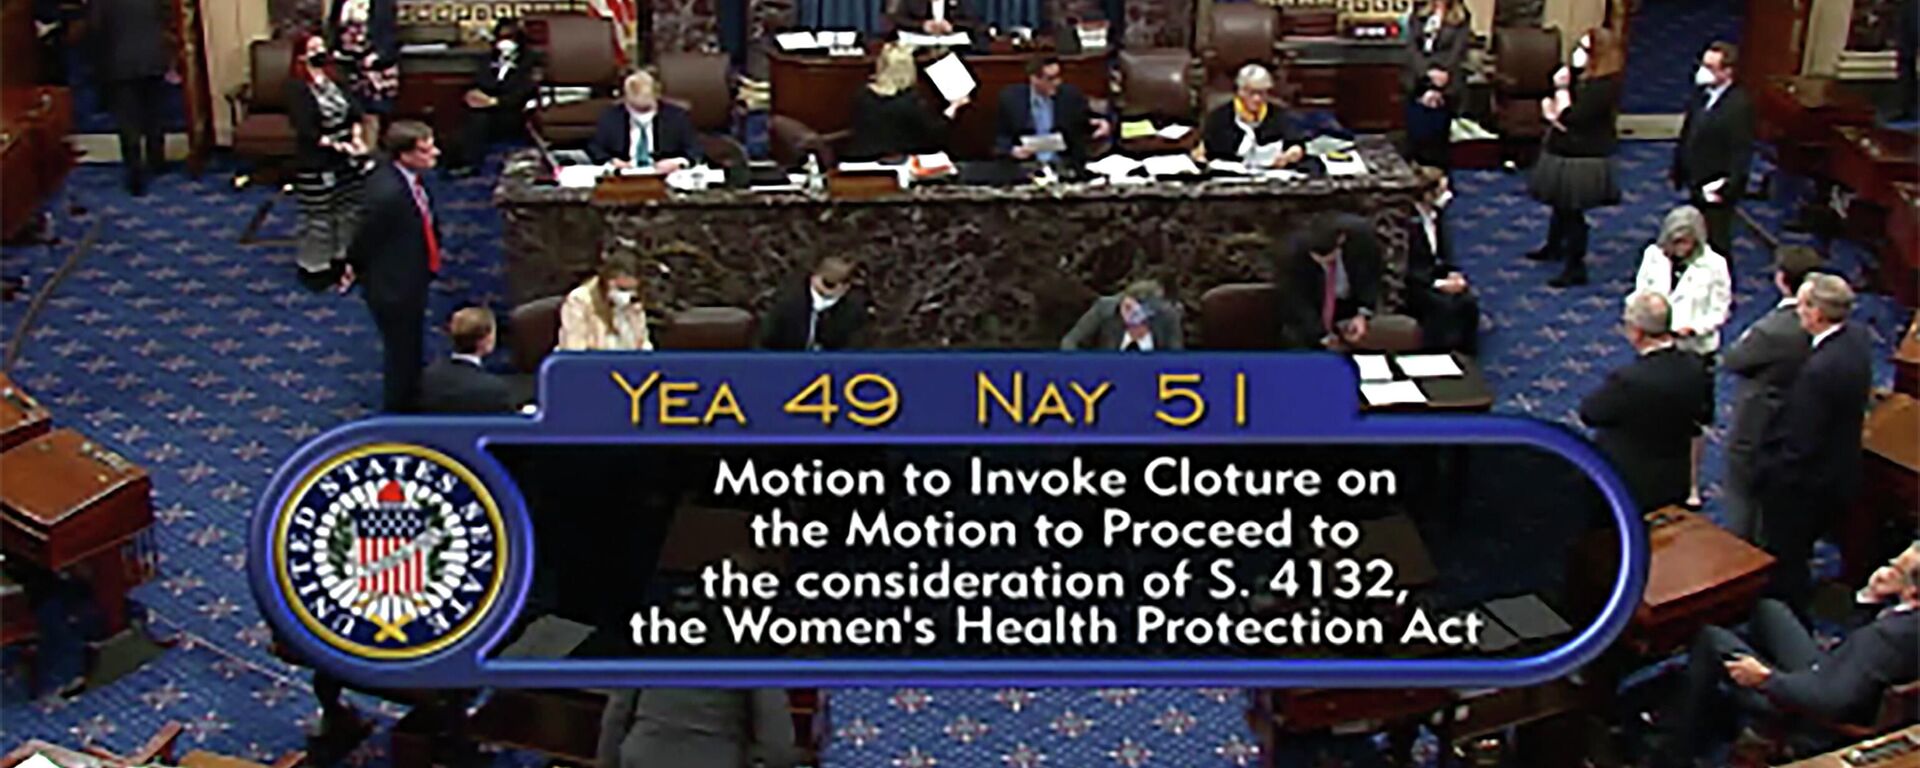 In this image from Senate TV, the tally of a Senate vote that was taken on the Senate floor is shown, Wednesday, May 11, 2022 at the Capitol in Washington. The Senate has failed vote in an effort toward enshrining Roe v. Wade abortion access into federal law. Wednesday's 51-49 negative vote almost along party lines provided a stark display of the nation’s partisan divide over the landmark court decision and the limits of legislative action. The afternoon roll call promised to be the first of several efforts in Congress to preserve the nearly 50-year-old court ruling. - Sputnik International, 1920, 11.05.2022